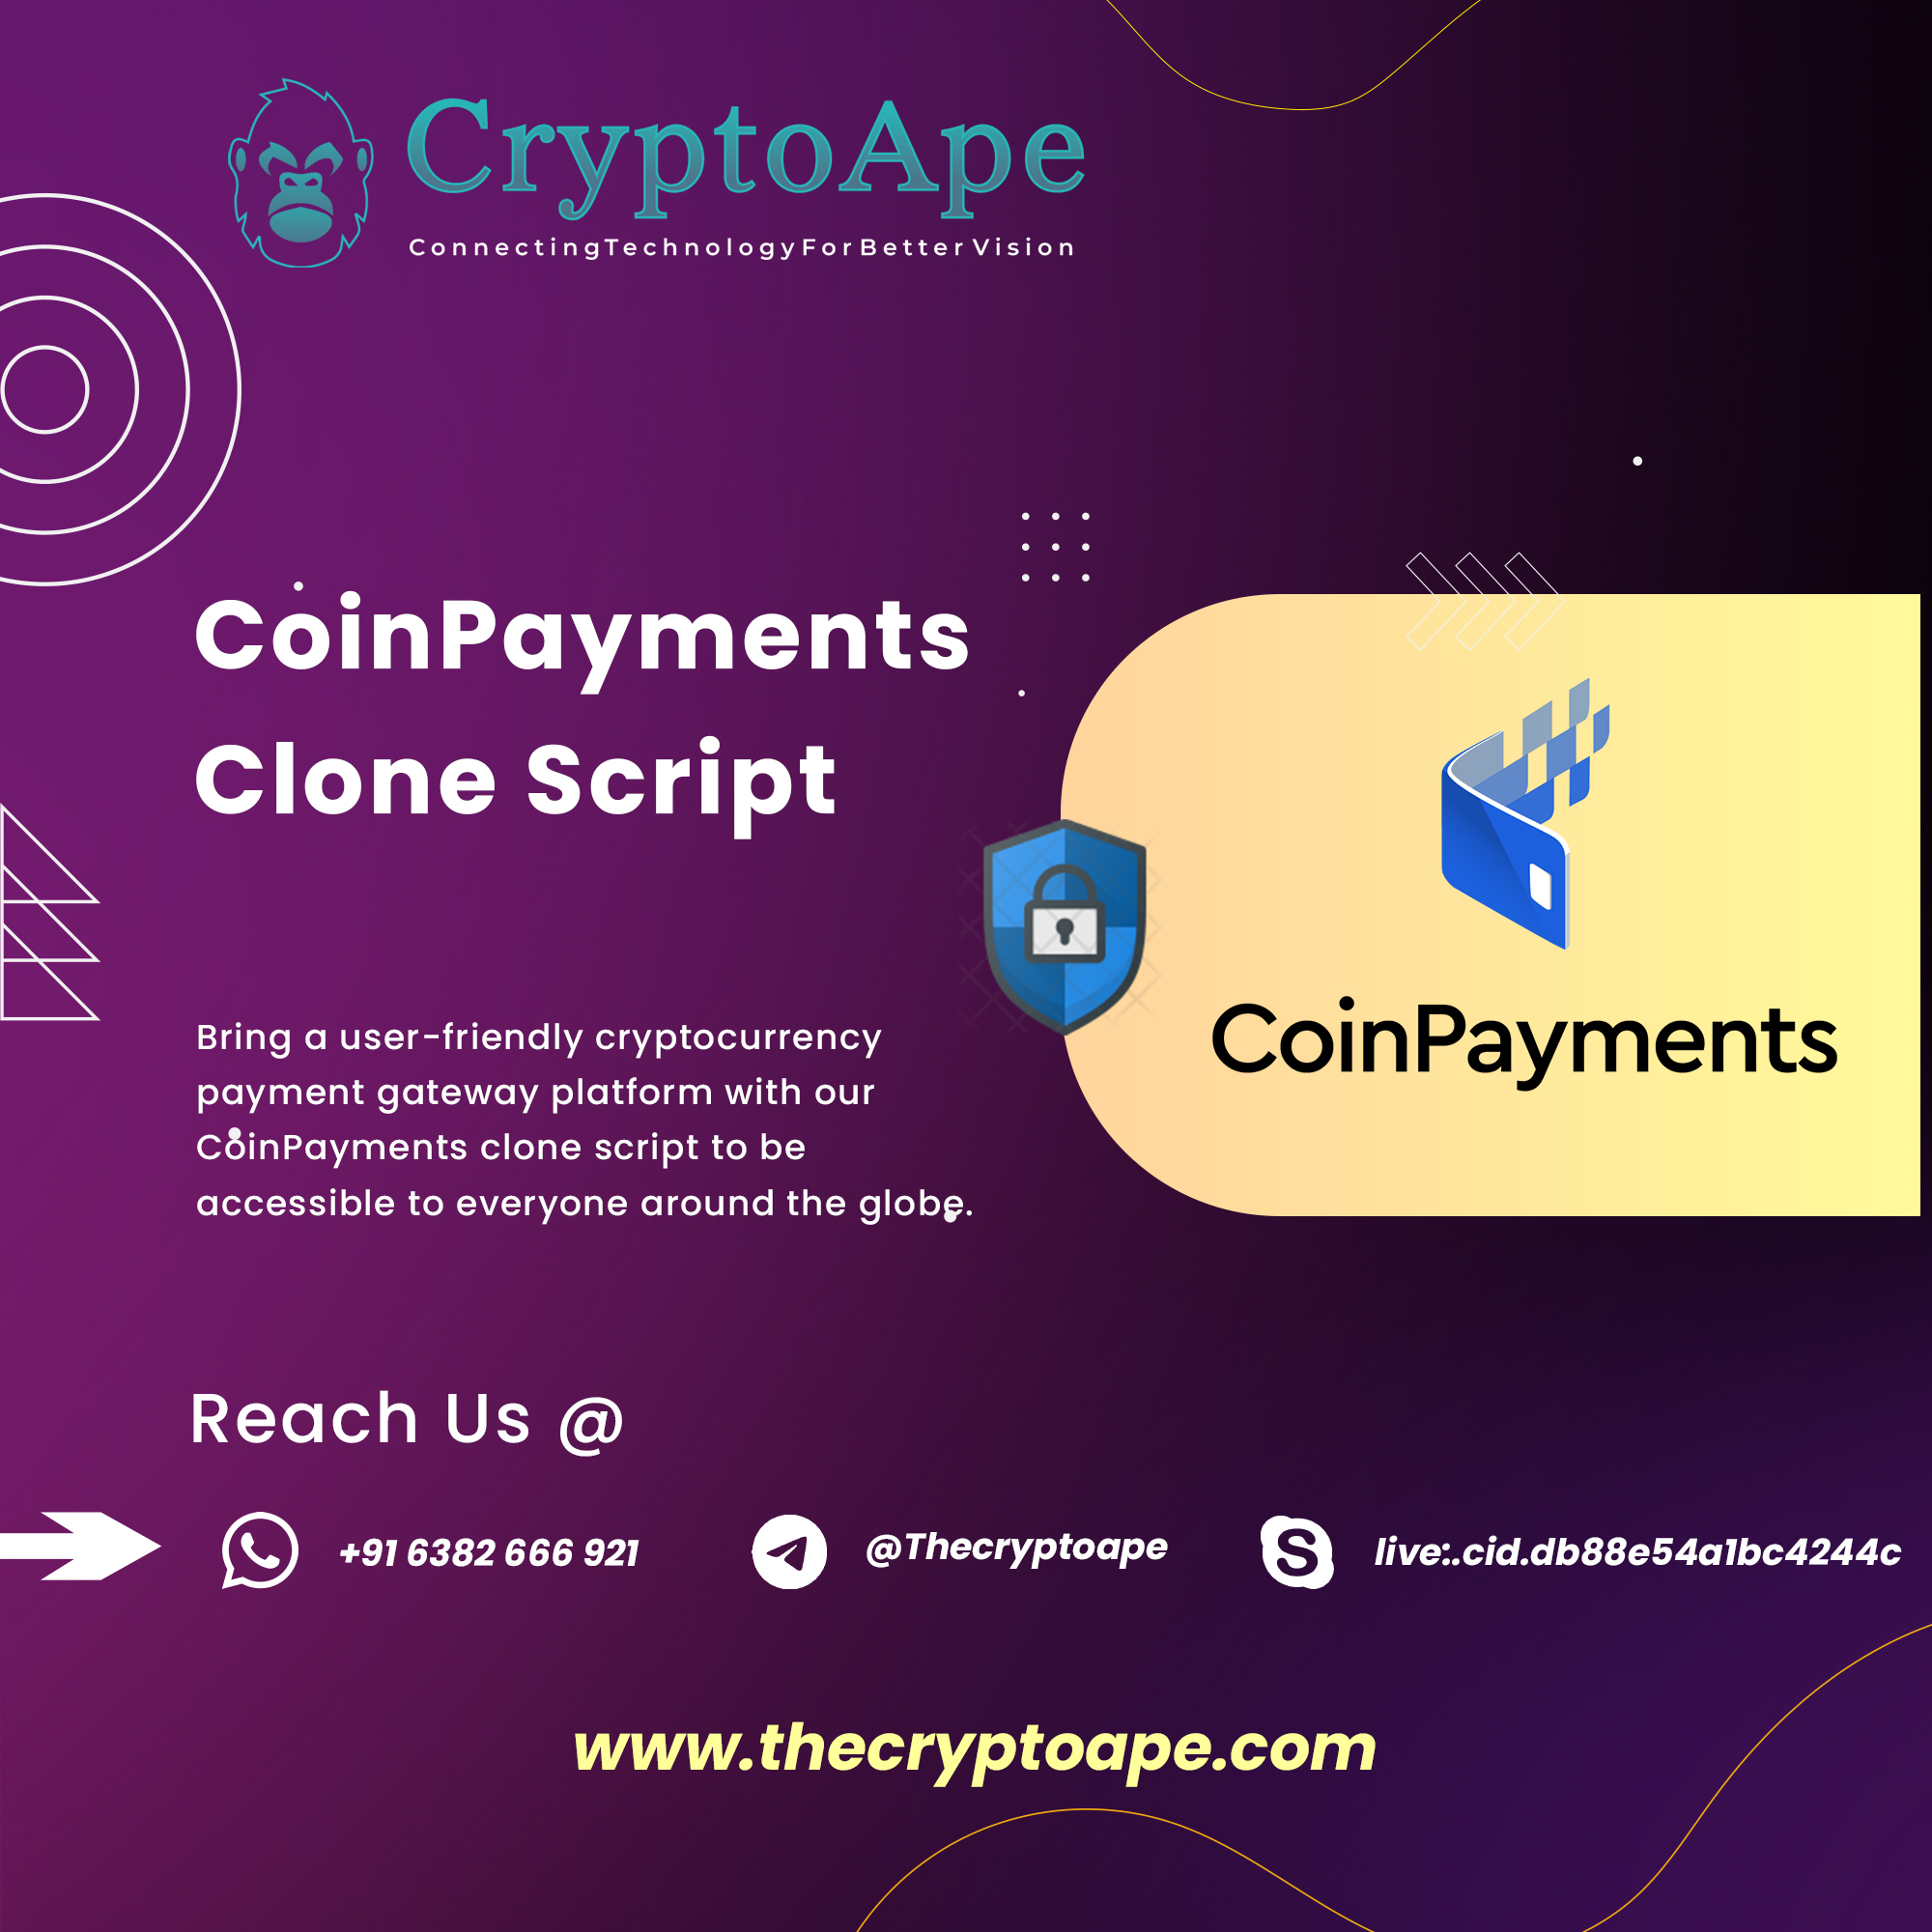 noe

Wa 4 y

A (SY | 2 0h ala /\
J y | gd ph ~~ | A |

VAN VA RU VEG Va

"} Y)
A Hh ConnectingTechnologyForBetter Vision

  

CoinPayments
Clone Script

Ne

Bring a user-friendly cryptocurrency Coin Payments

payment gateway platform with our
cdinPayments clone script to be

 

accessible to everyone around the globg.

Reach Us @
=] ®) +91 6382 666 921 oO @Thecryptoape S| live:.cid.db88e54albc4244c

J

www.thecryptoape.com a

J